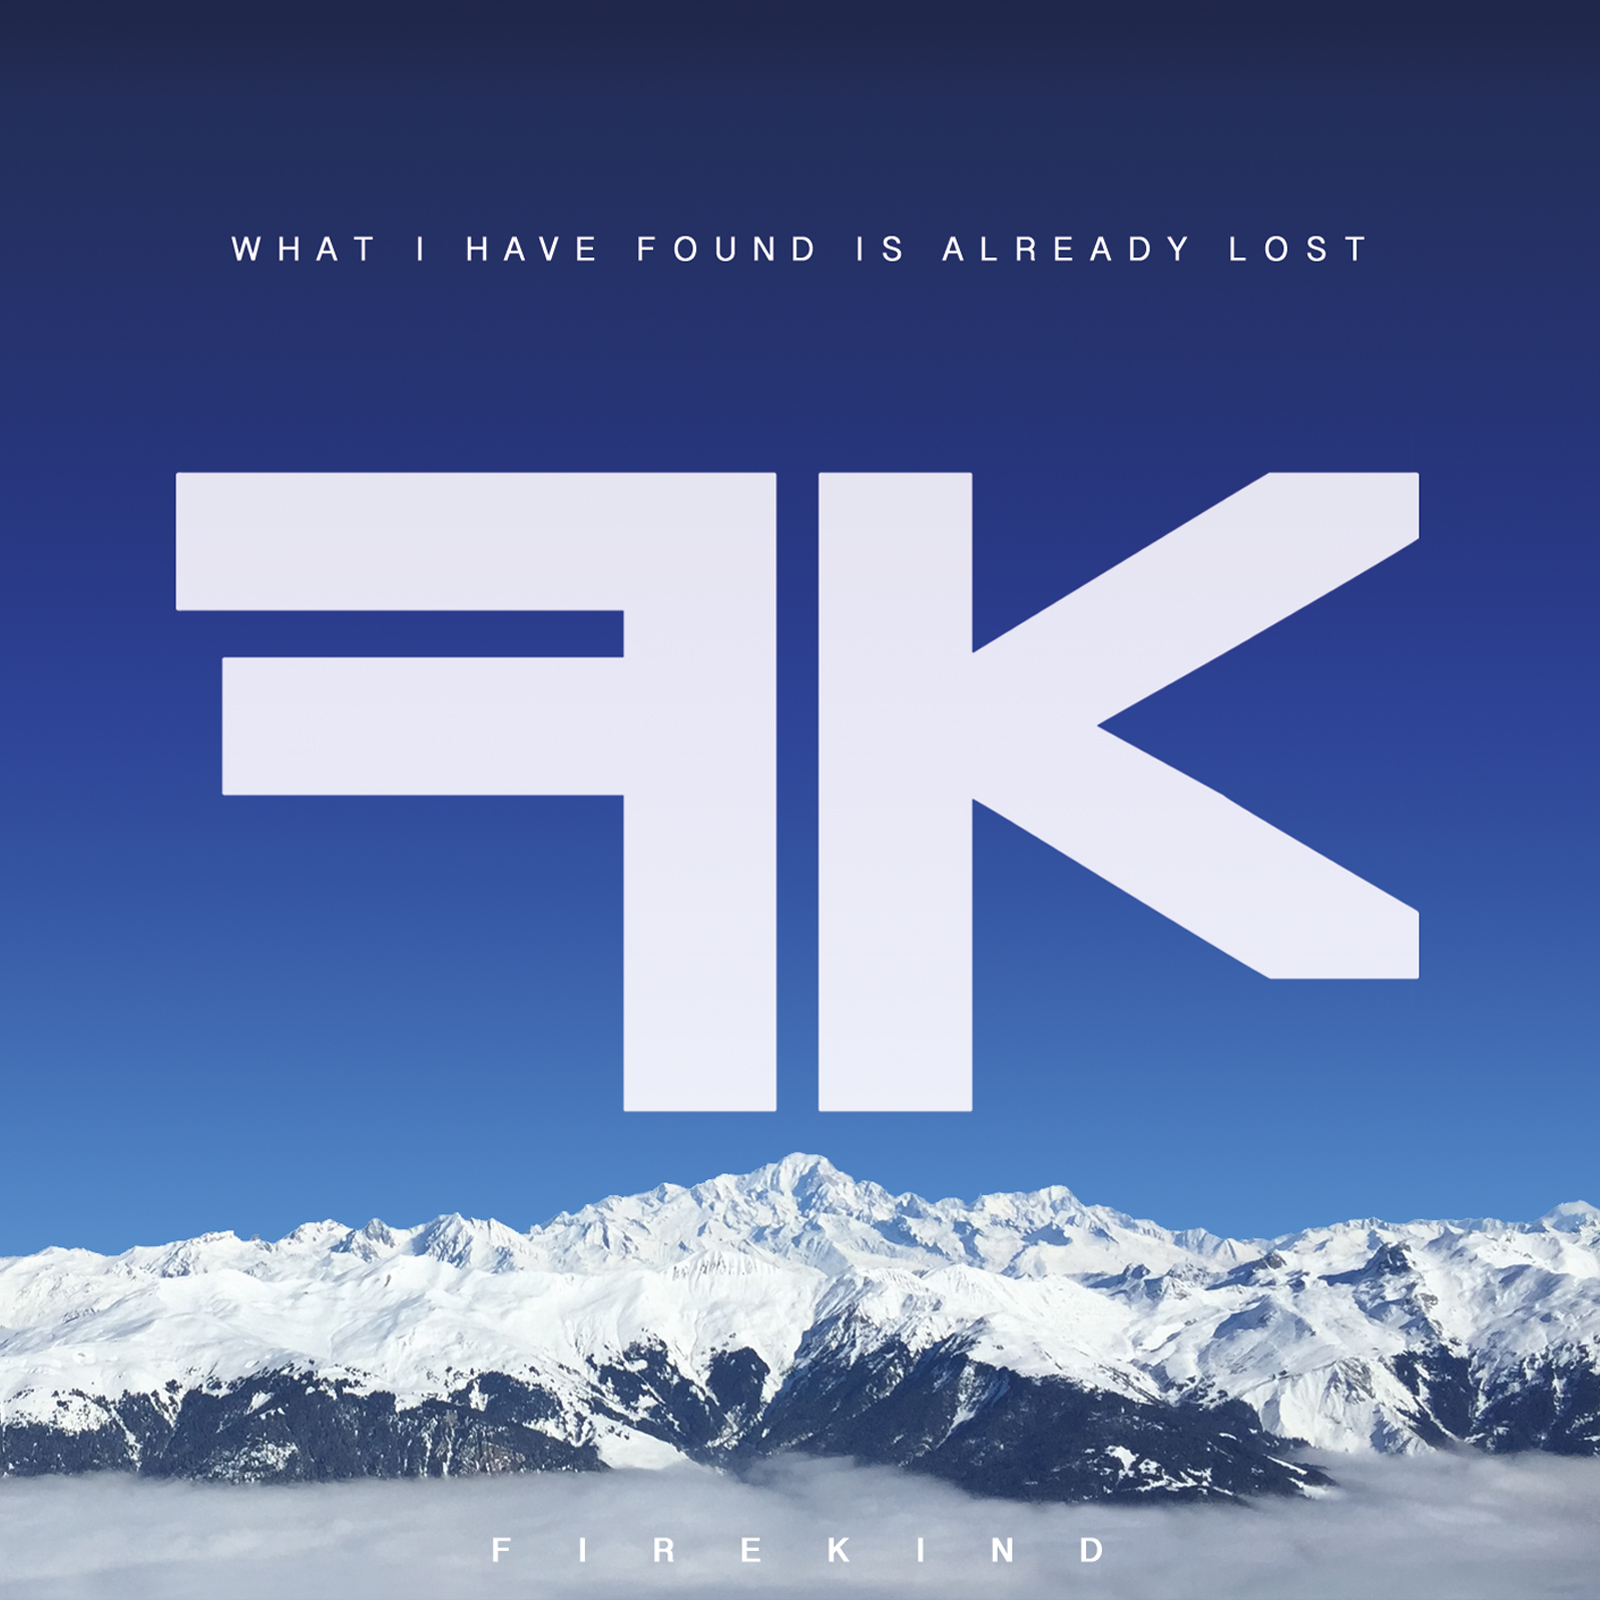  Firekind – What I Have Found Is Already Lost